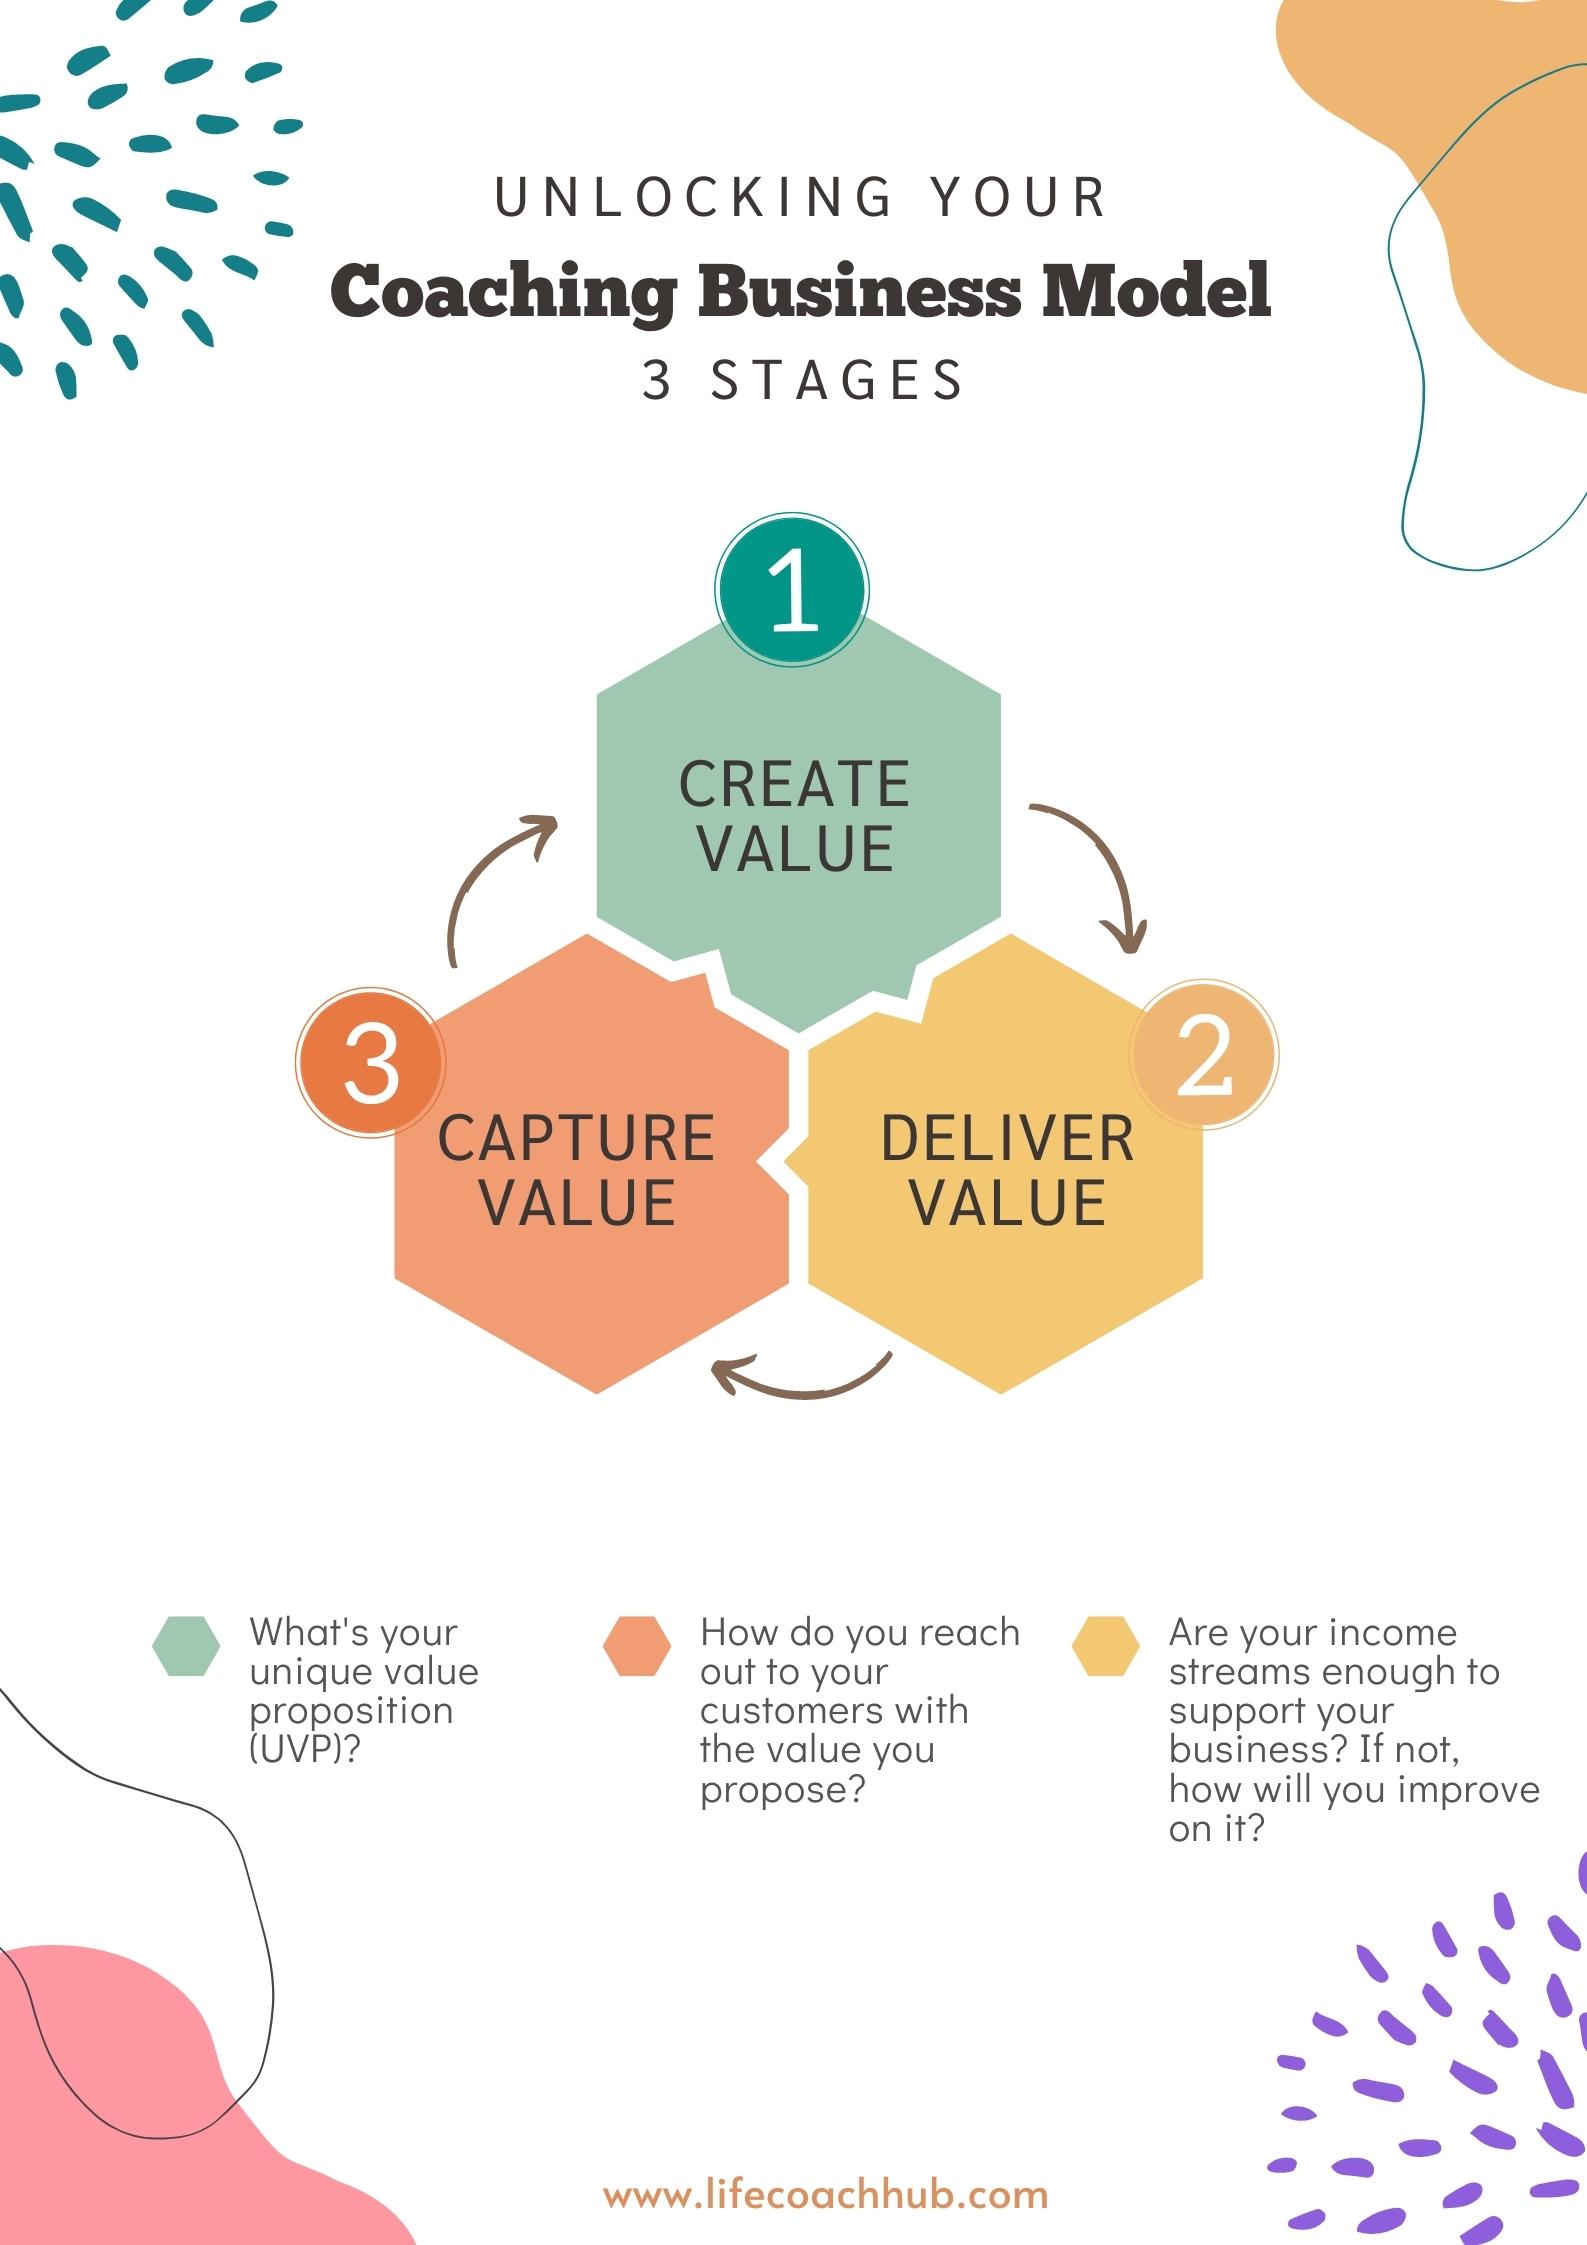 How to Unlock your Coaching Business Model: 3 Stages